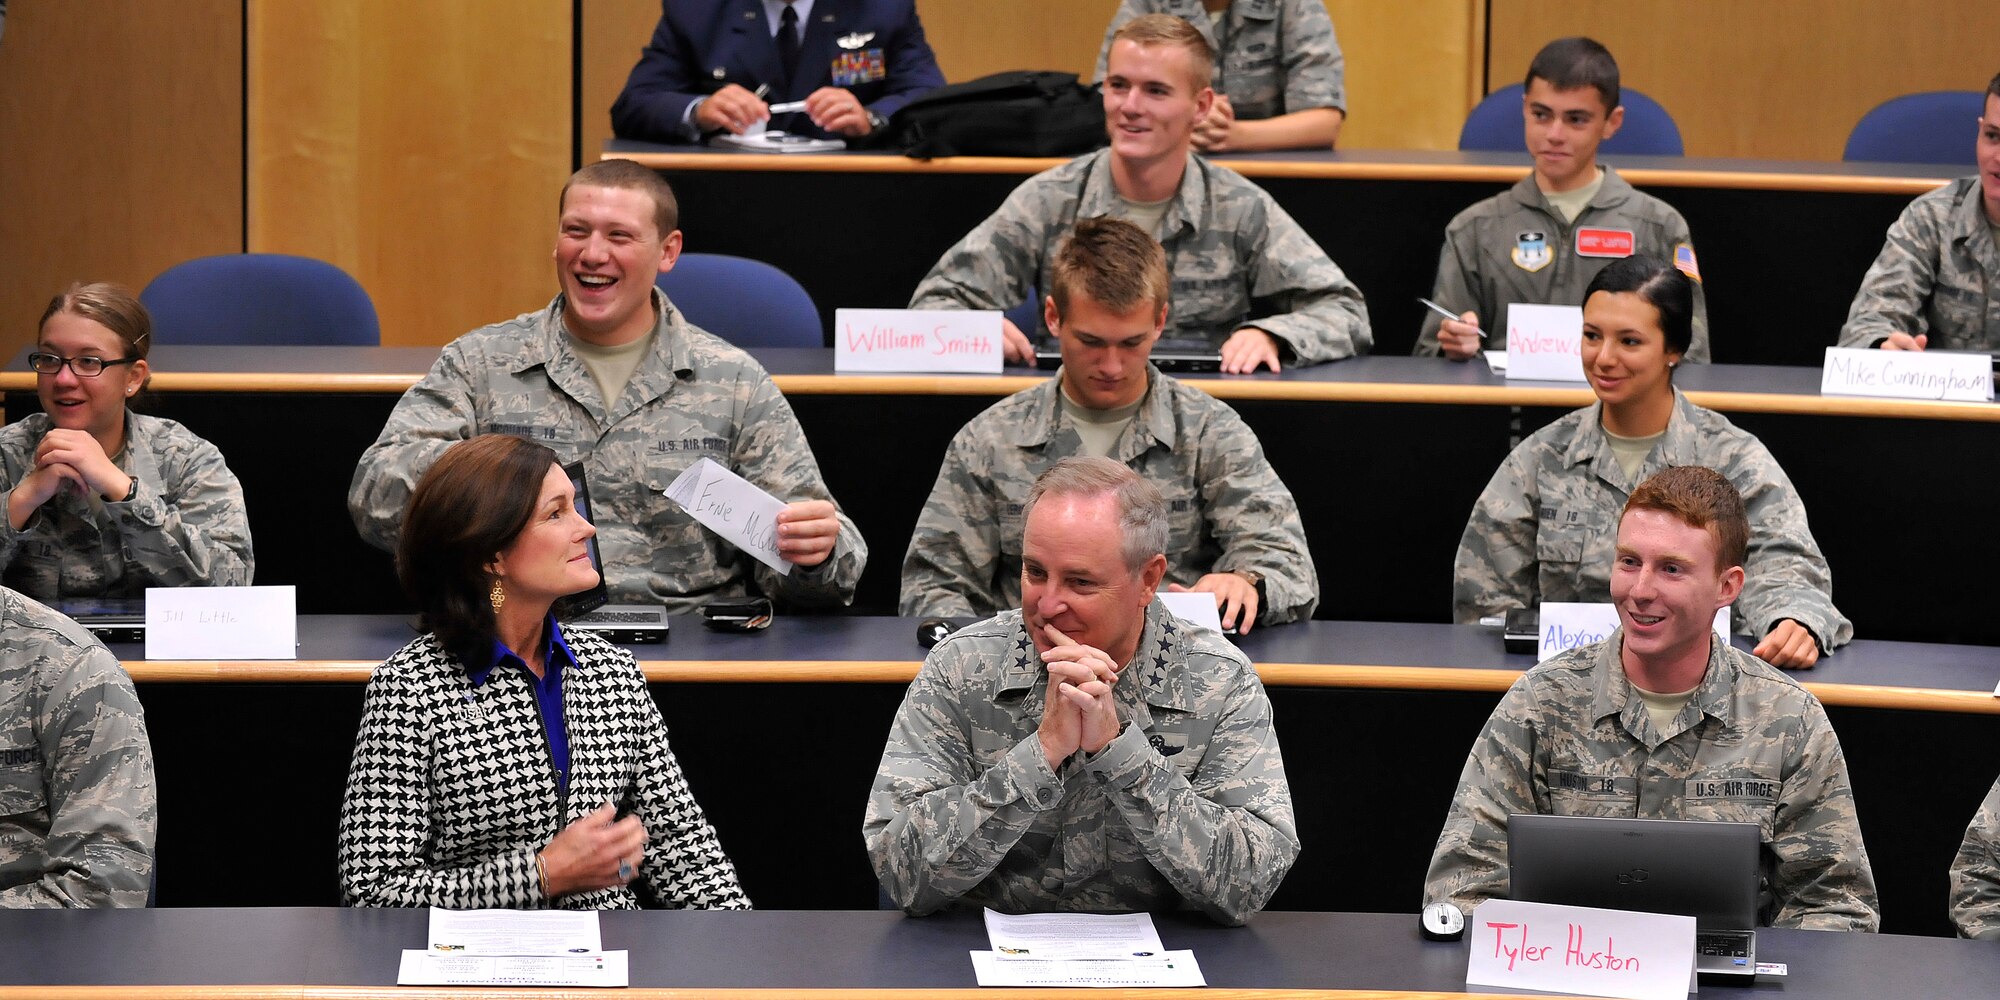 Air Force Chief of Staff Gen. Mark A. Welsh III and his wife, Betty, sit in a Behavioral Science 110 class in Fairchild Hall Sept. 29, 2014, during the Welsh's weeklong visit to the U.S. Air Force Academy, Colo. During the visit, they met with Airmen, cadets and civilian staff. Welsh also hosted an all call for the 10th Air Base Wing, specifically addressing civilian concerns and thanking Airmen for all they do to support the Academy's mission of developing leaders of character. (U.S. Air Force photo/Jason Gutierrez)